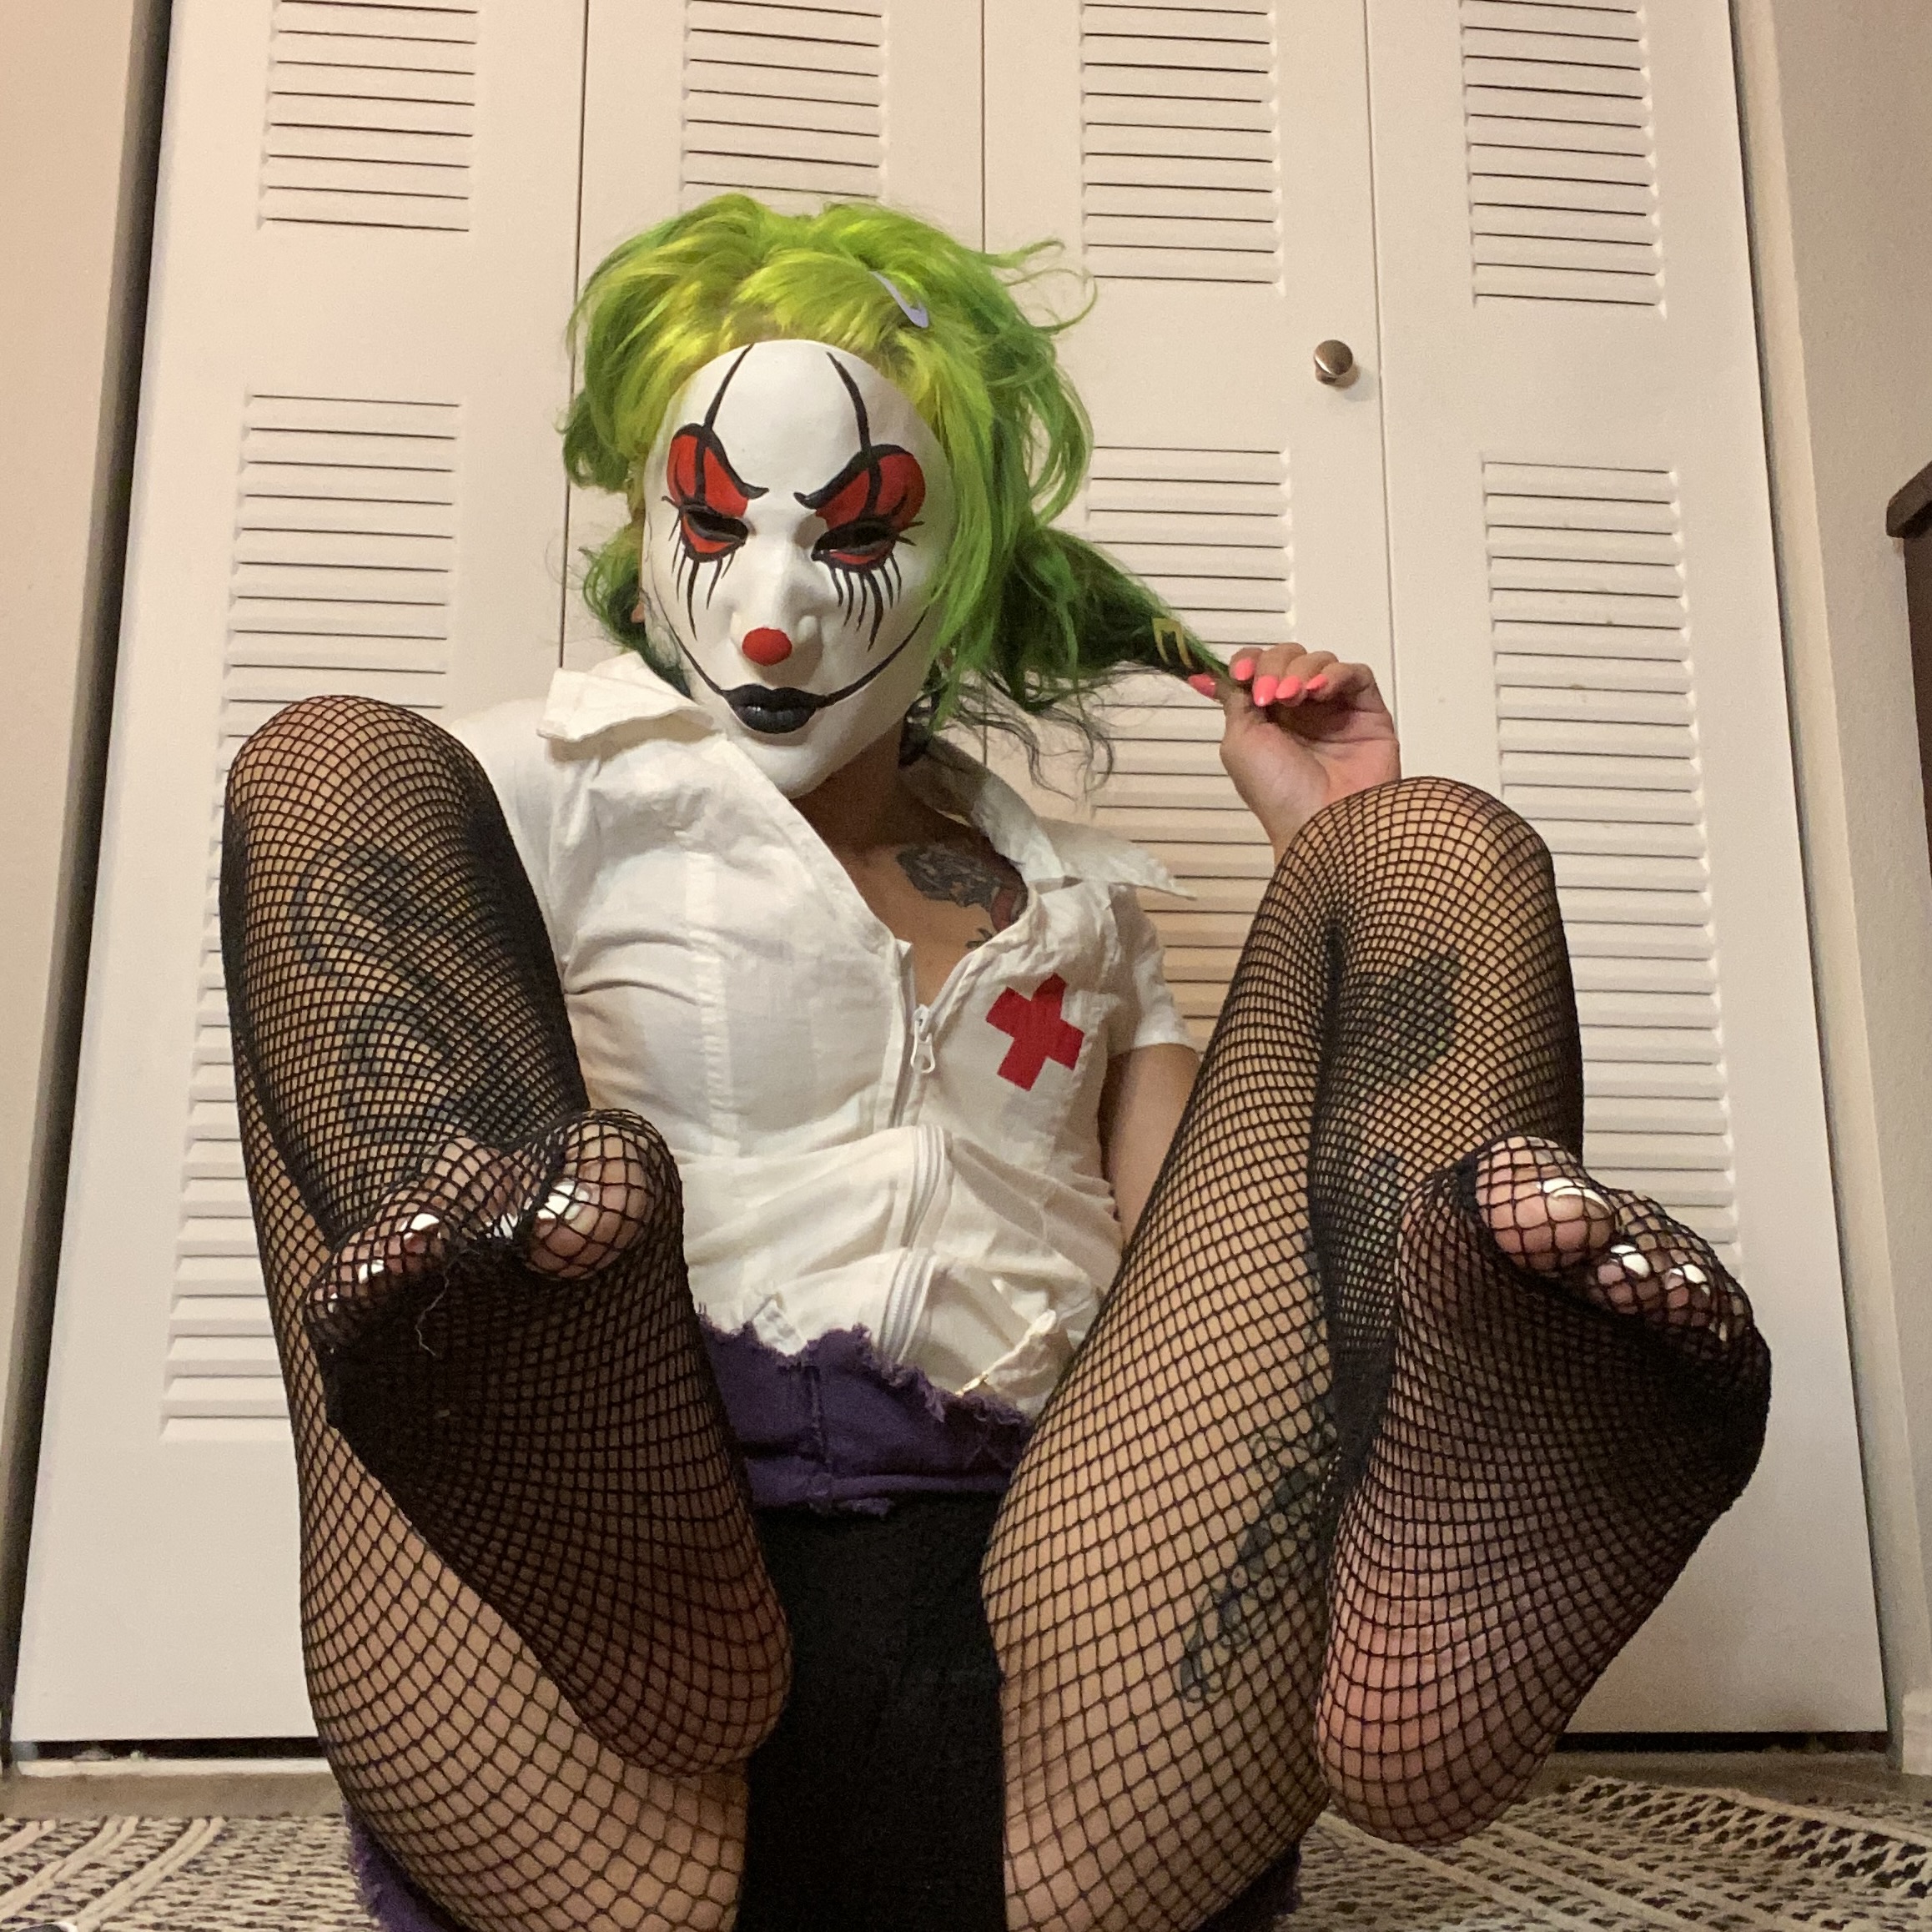 Halloween Scary Clown Porn - Clown Videos, Photos And Other Content and Other Amateur Porn Content on ELM